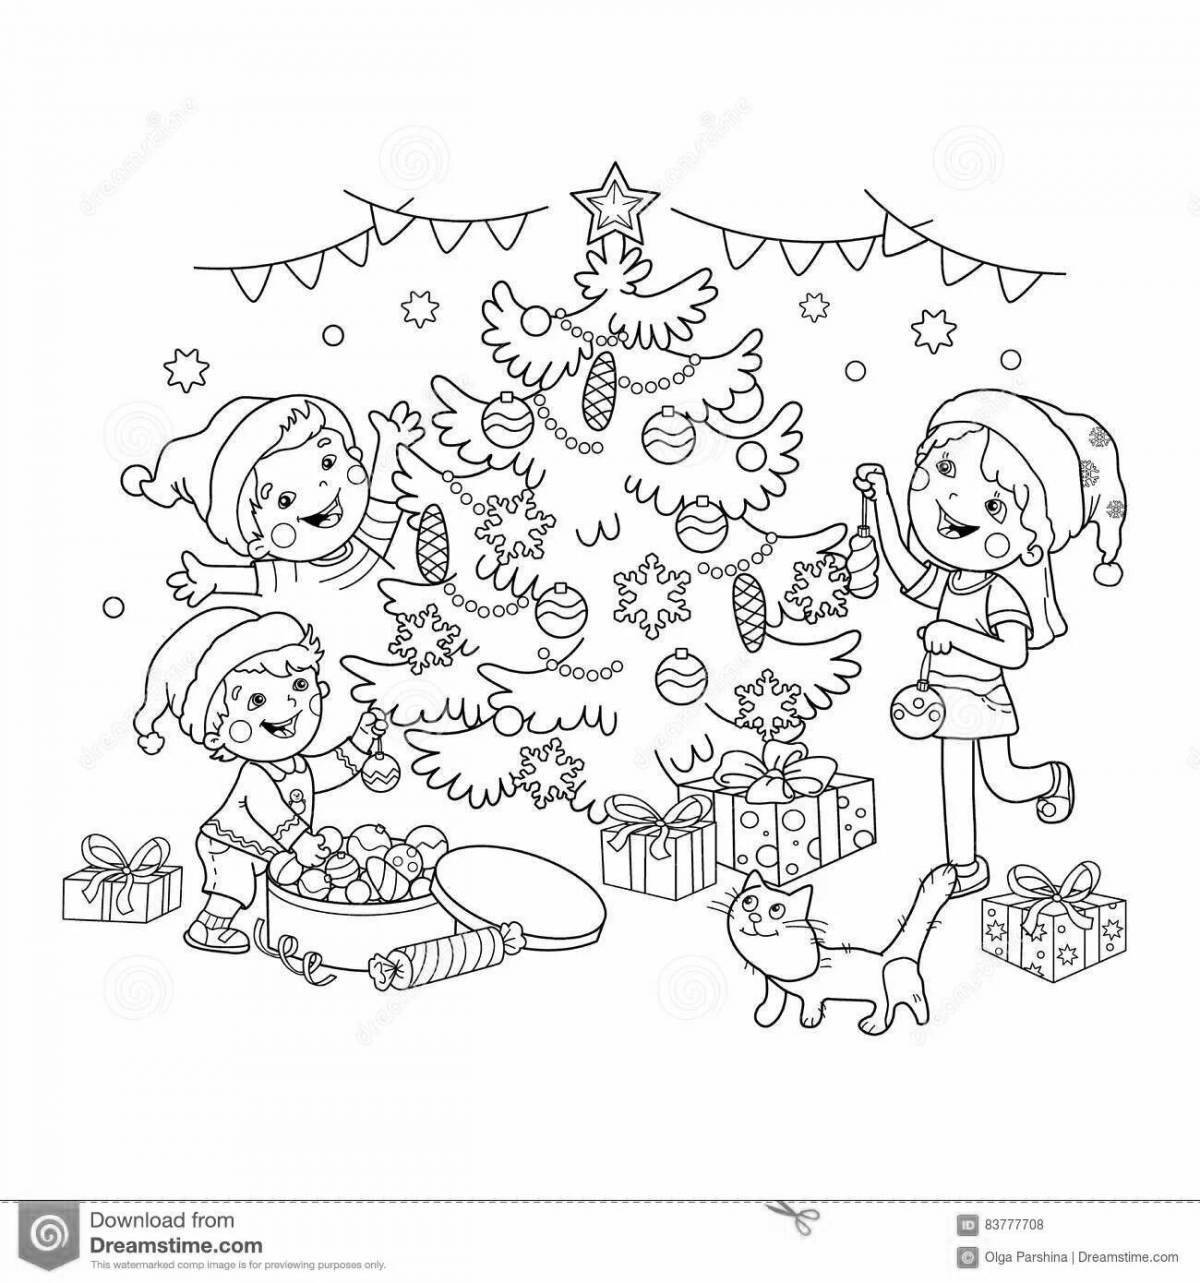 Coloring page merry round dance around the tree